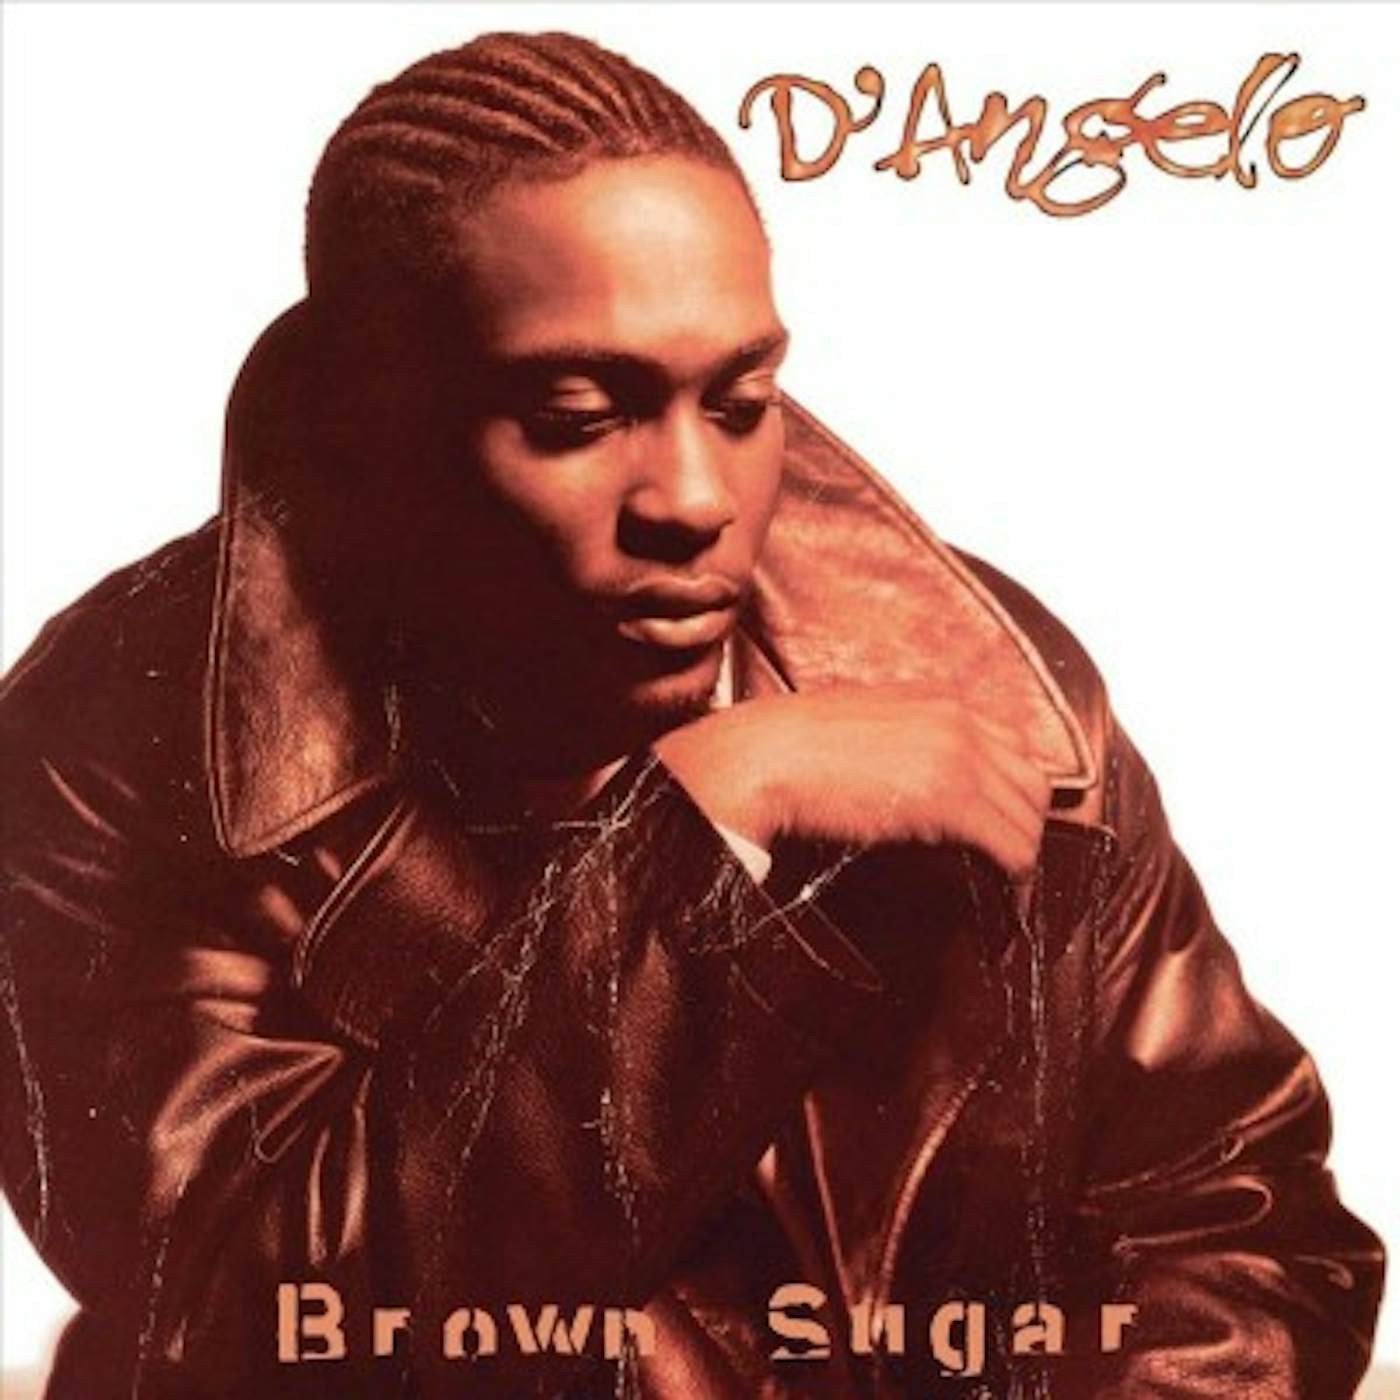 D'Angelo Brown Sugar (White 2 LP)(Limited Edition) Vinyl Record